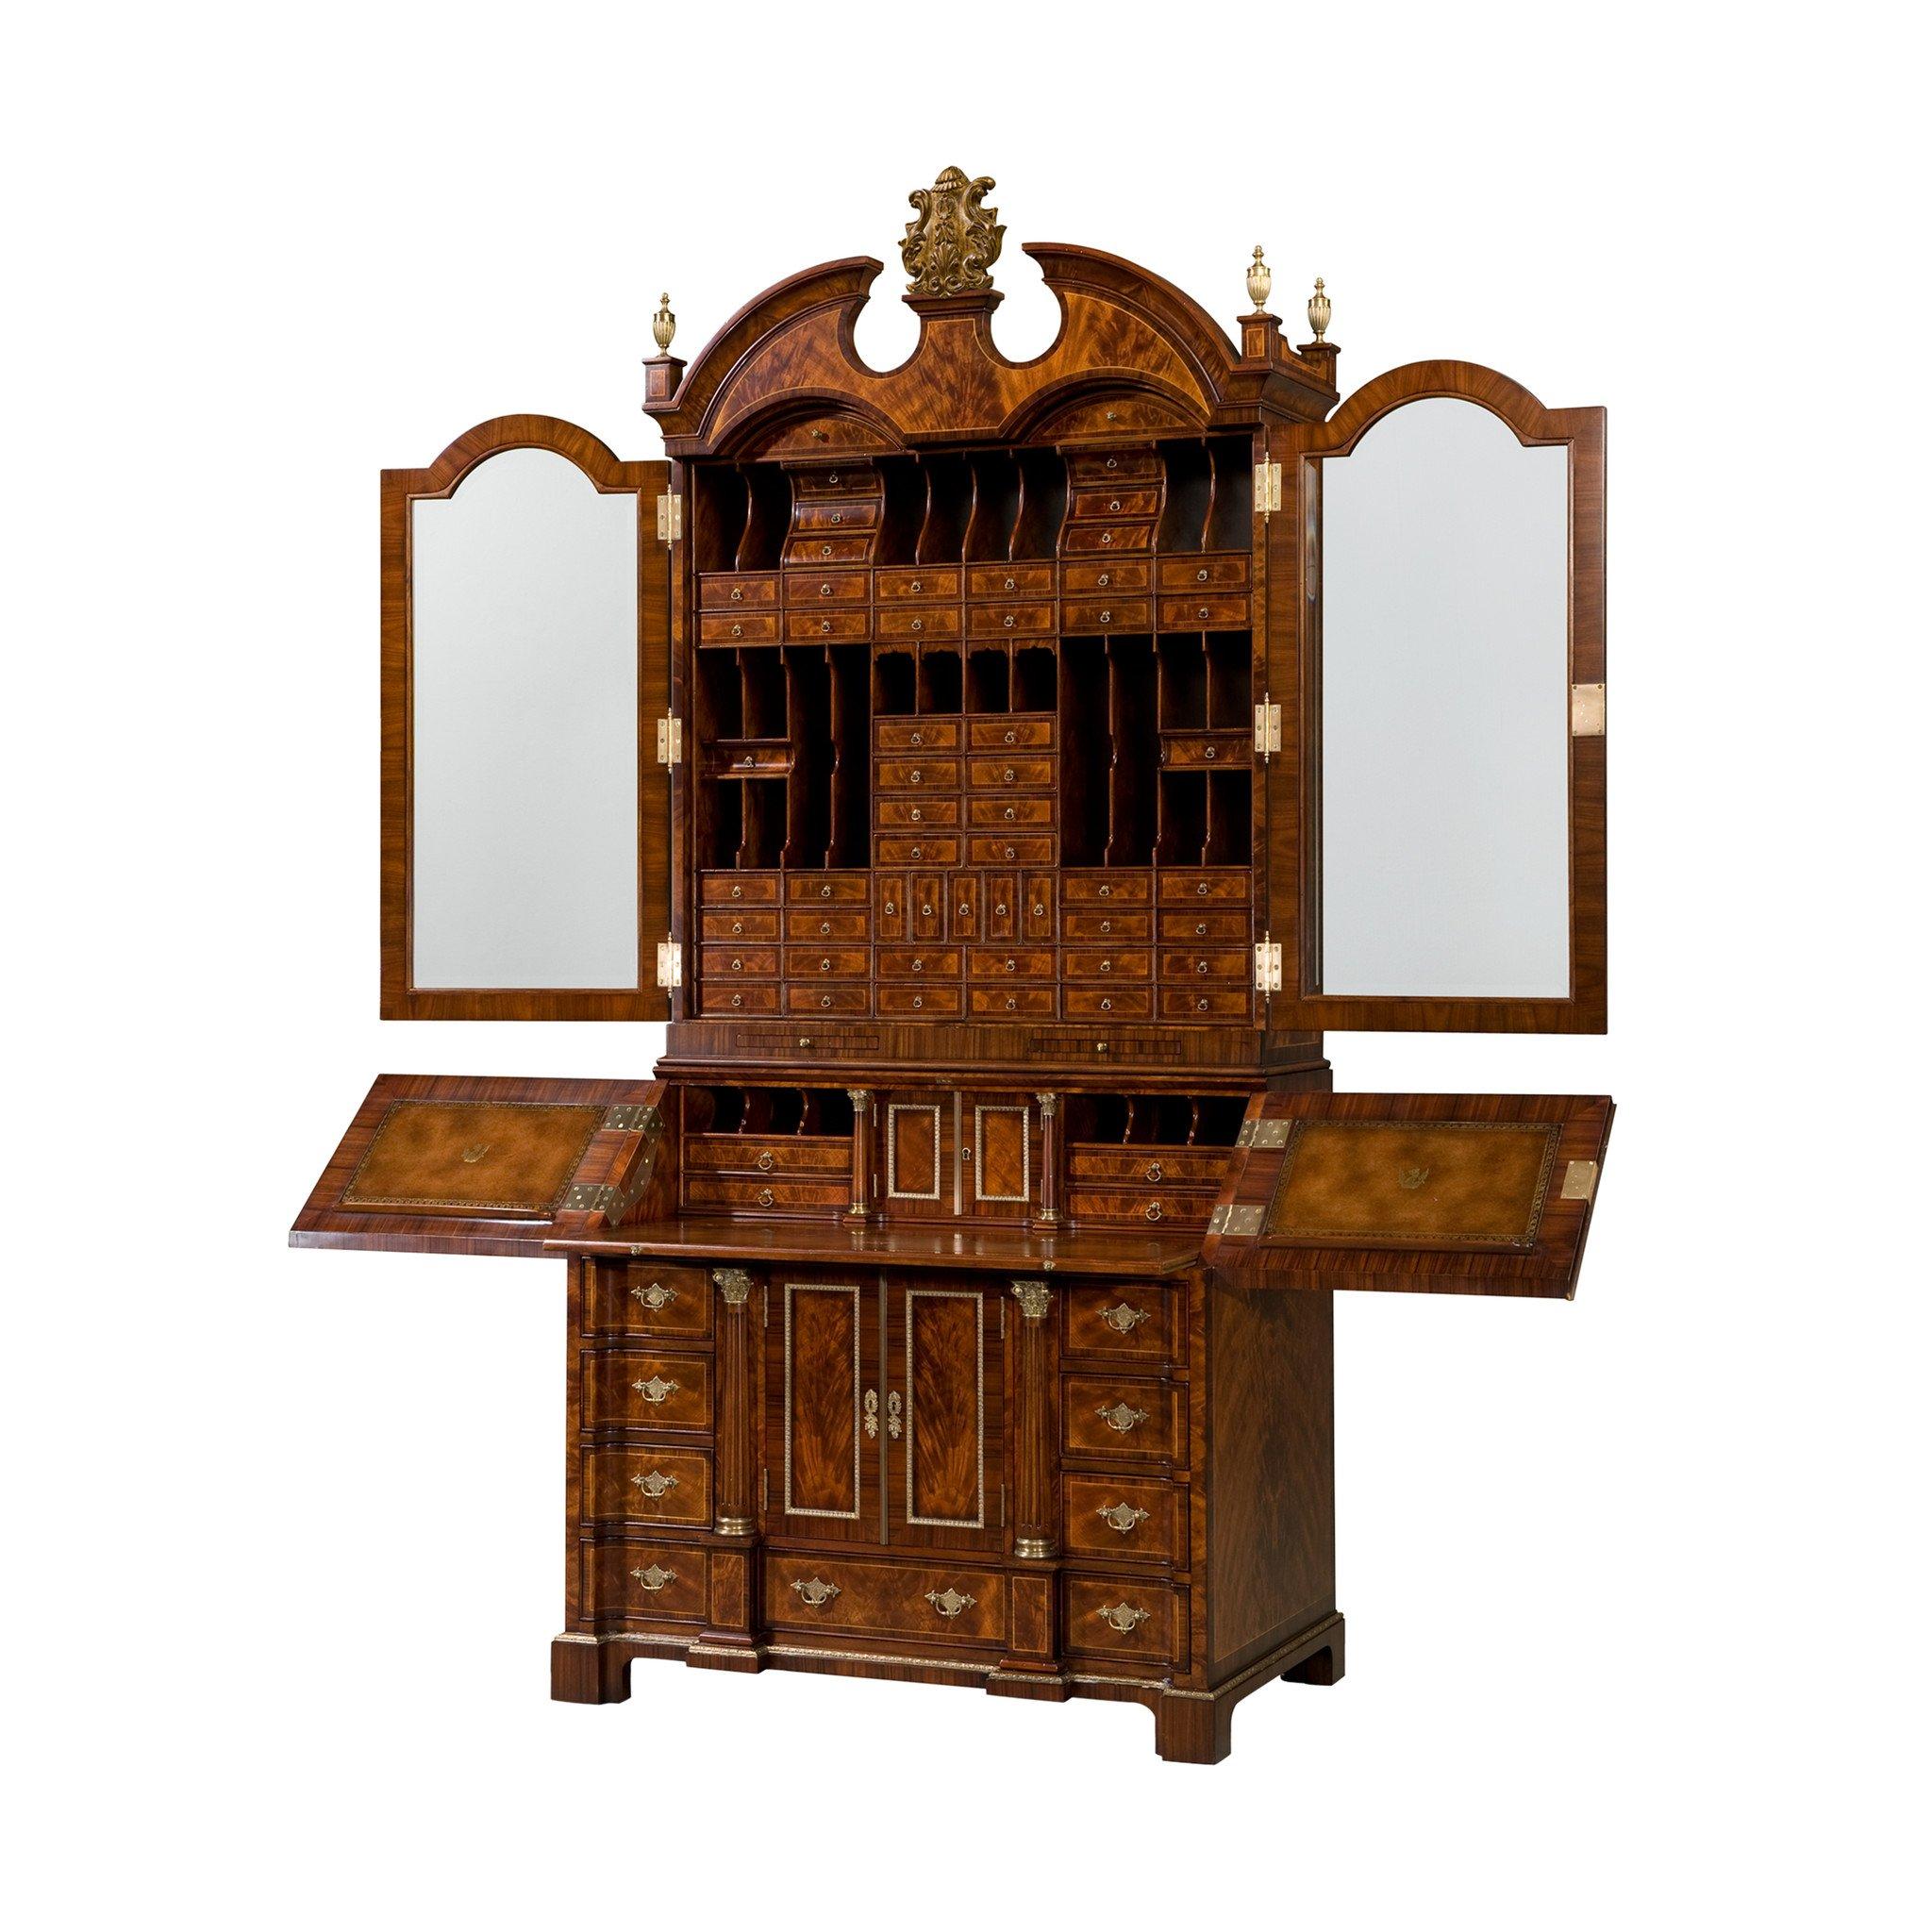 A flame mahogany and rosewood banded Bureau cabinet, with an architectural cornice centred by a gilt crest, above two glazed doors enclosing 45 drawers and 19 pigeon holes above two slides, the bureau opening to reveal a leather inset slide and a